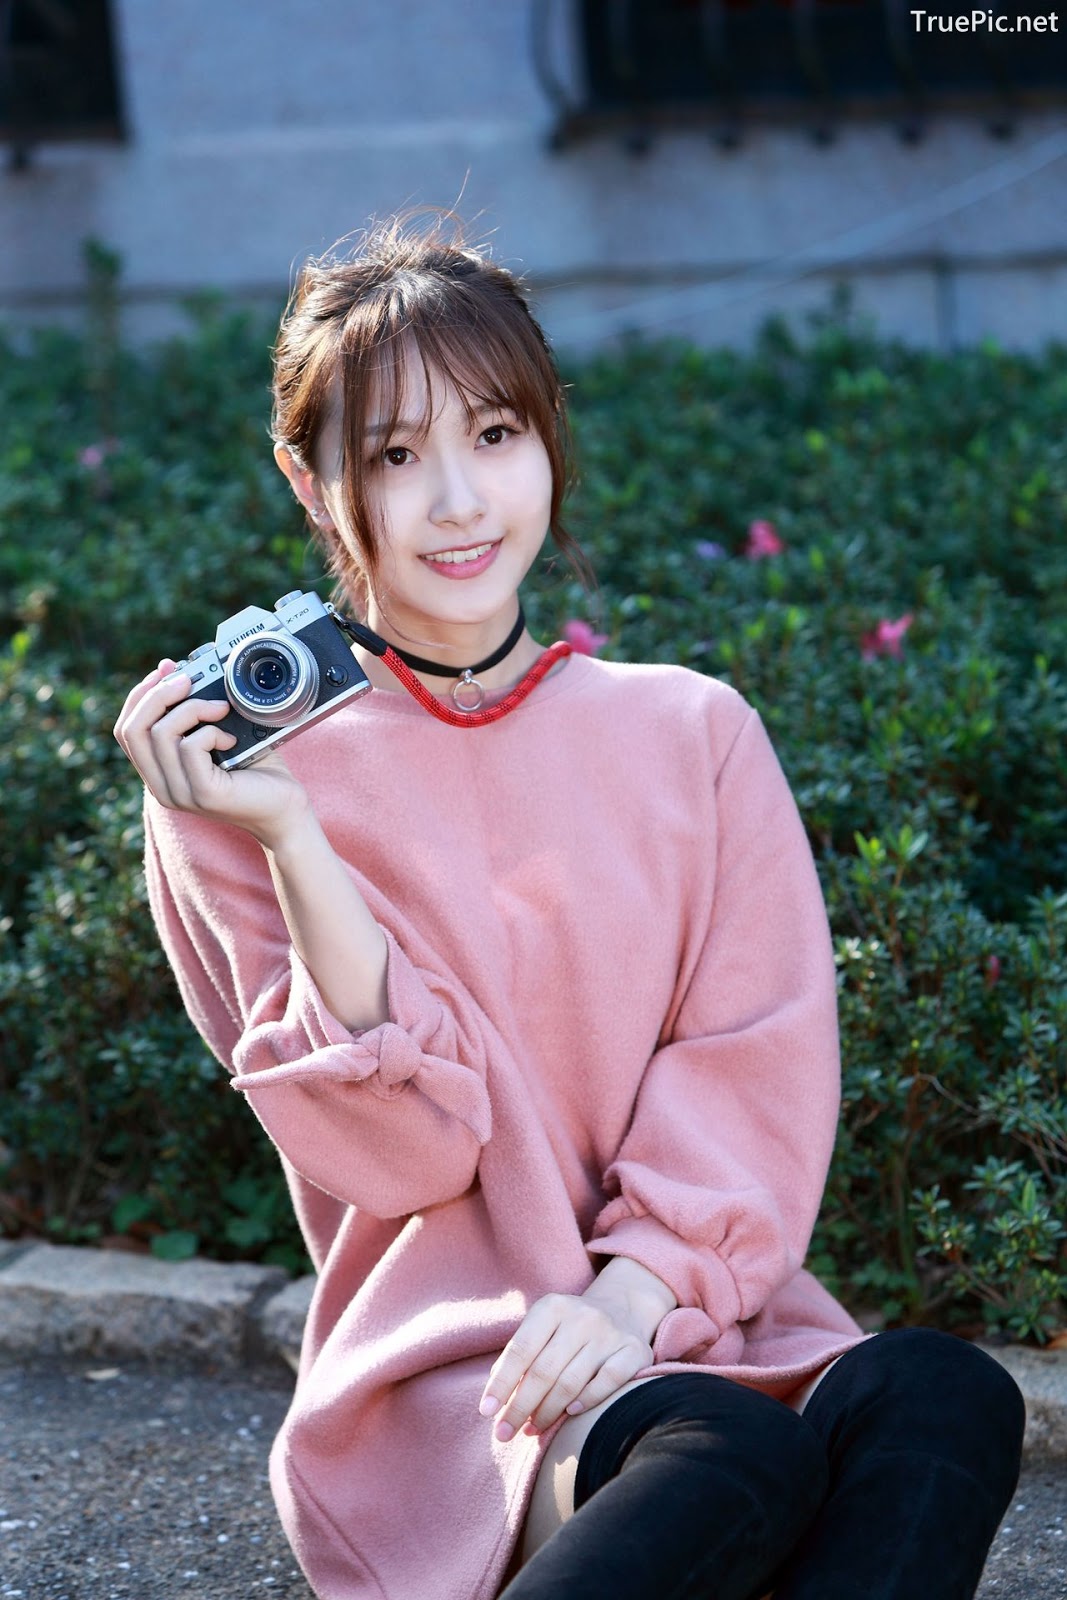 Image-Taiwanese-Model-郭思敏-Pure-And-Gorgeous-Girl-In-Pink-Sweater-Dress-TruePic.net- Picture-21